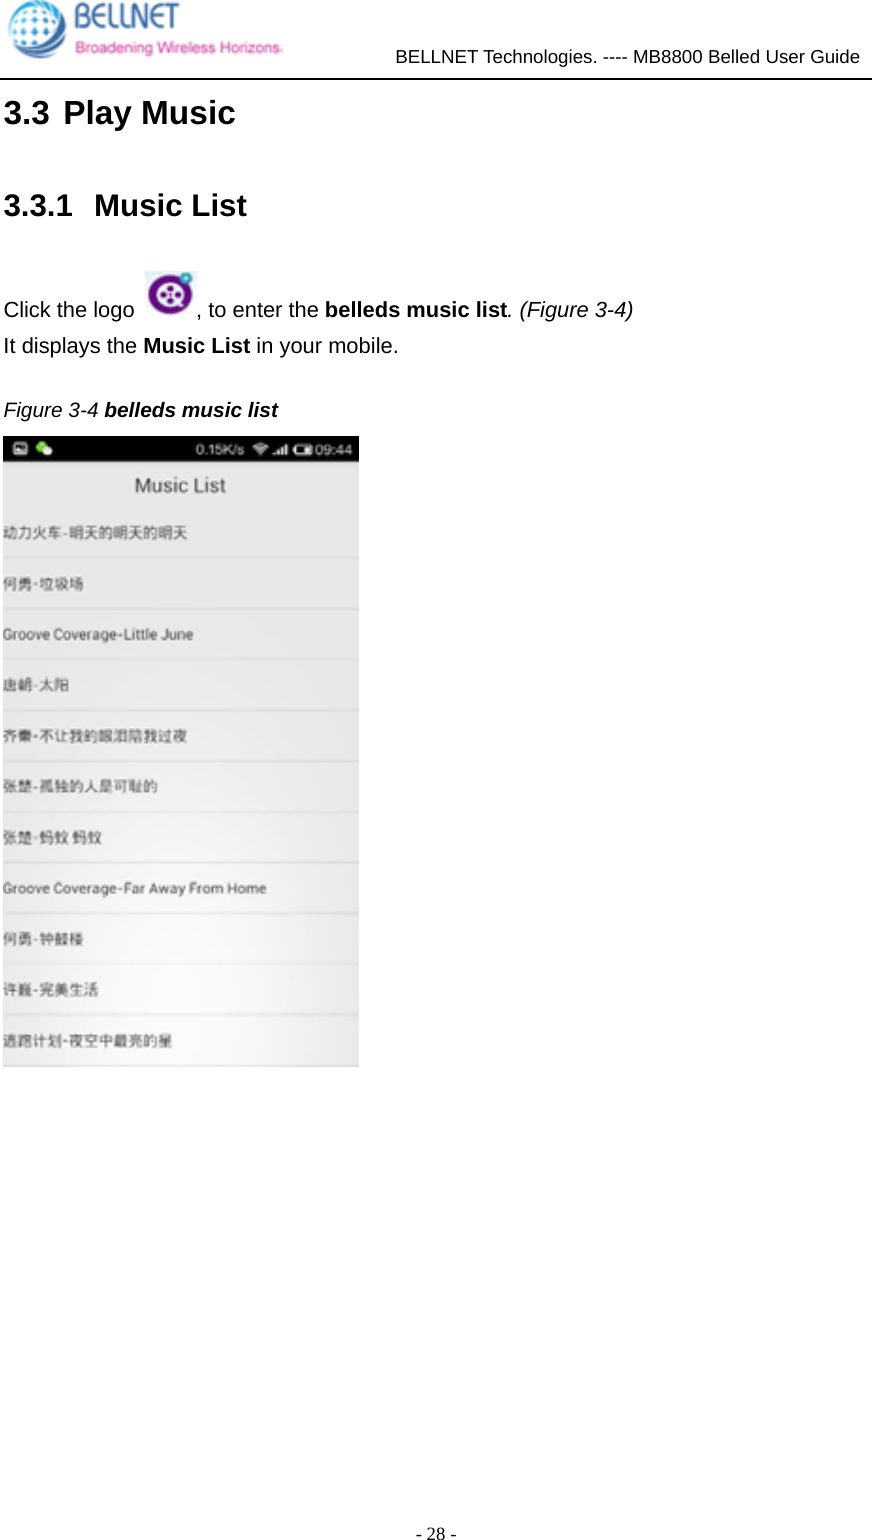             BELLNET Technologies. ---- MB8800 Belled User Guide  - 28 - 3.3 Play Music 3.3.1   Music List Click the logo  , to enter the belleds music list. (Figure 3-4) It displays the Music List in your mobile.  Figure 3-4 belleds music list           